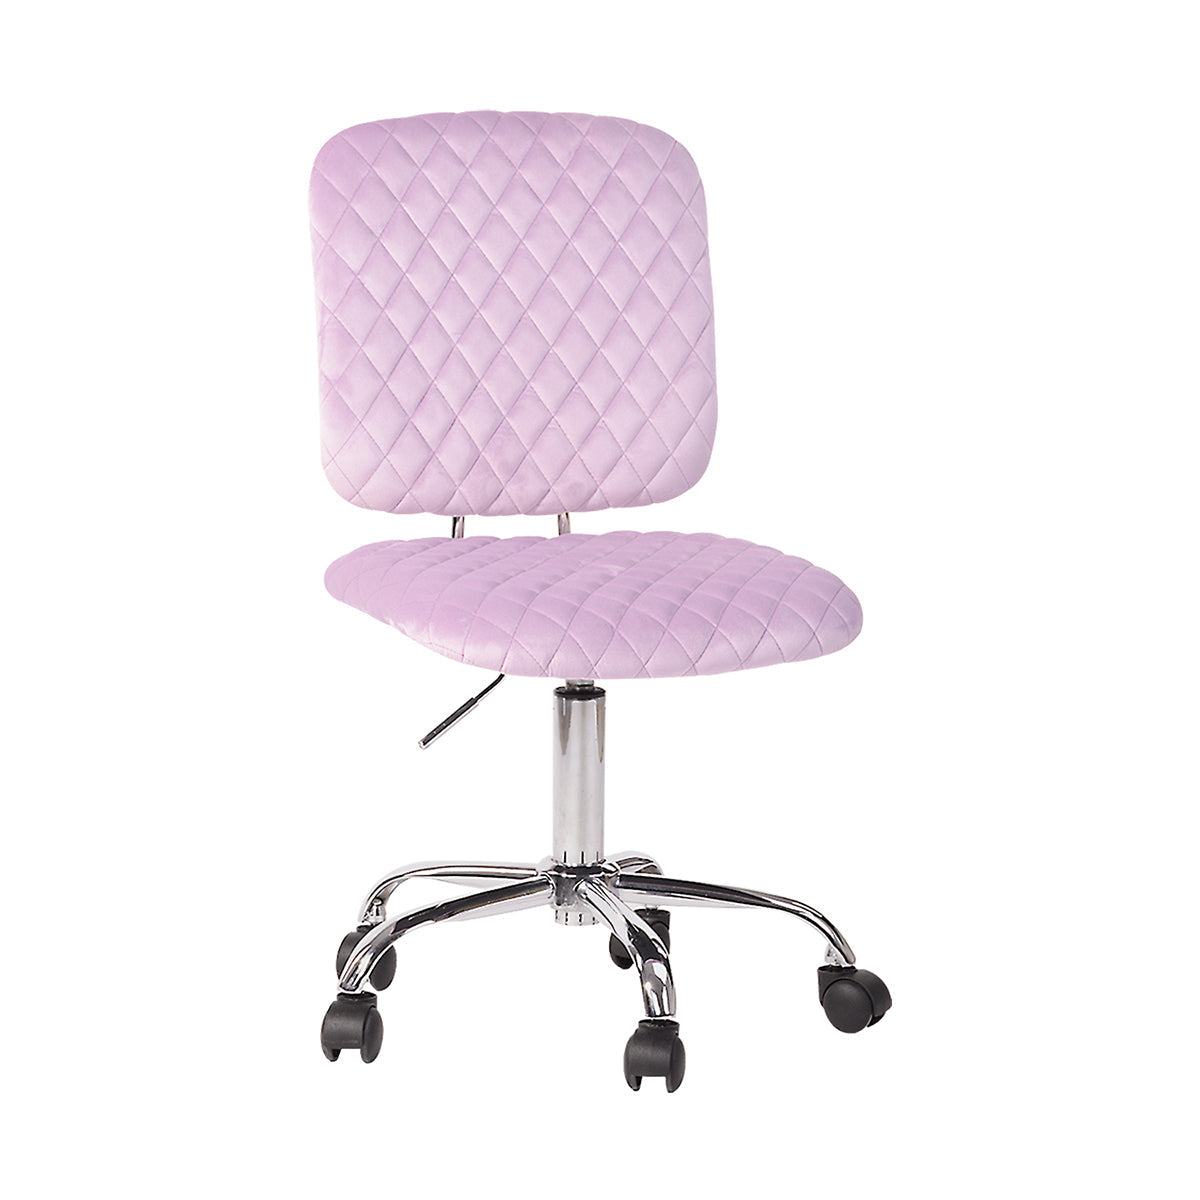 Dropship Pink Velvet Material. Home Computer Chair Office Chair